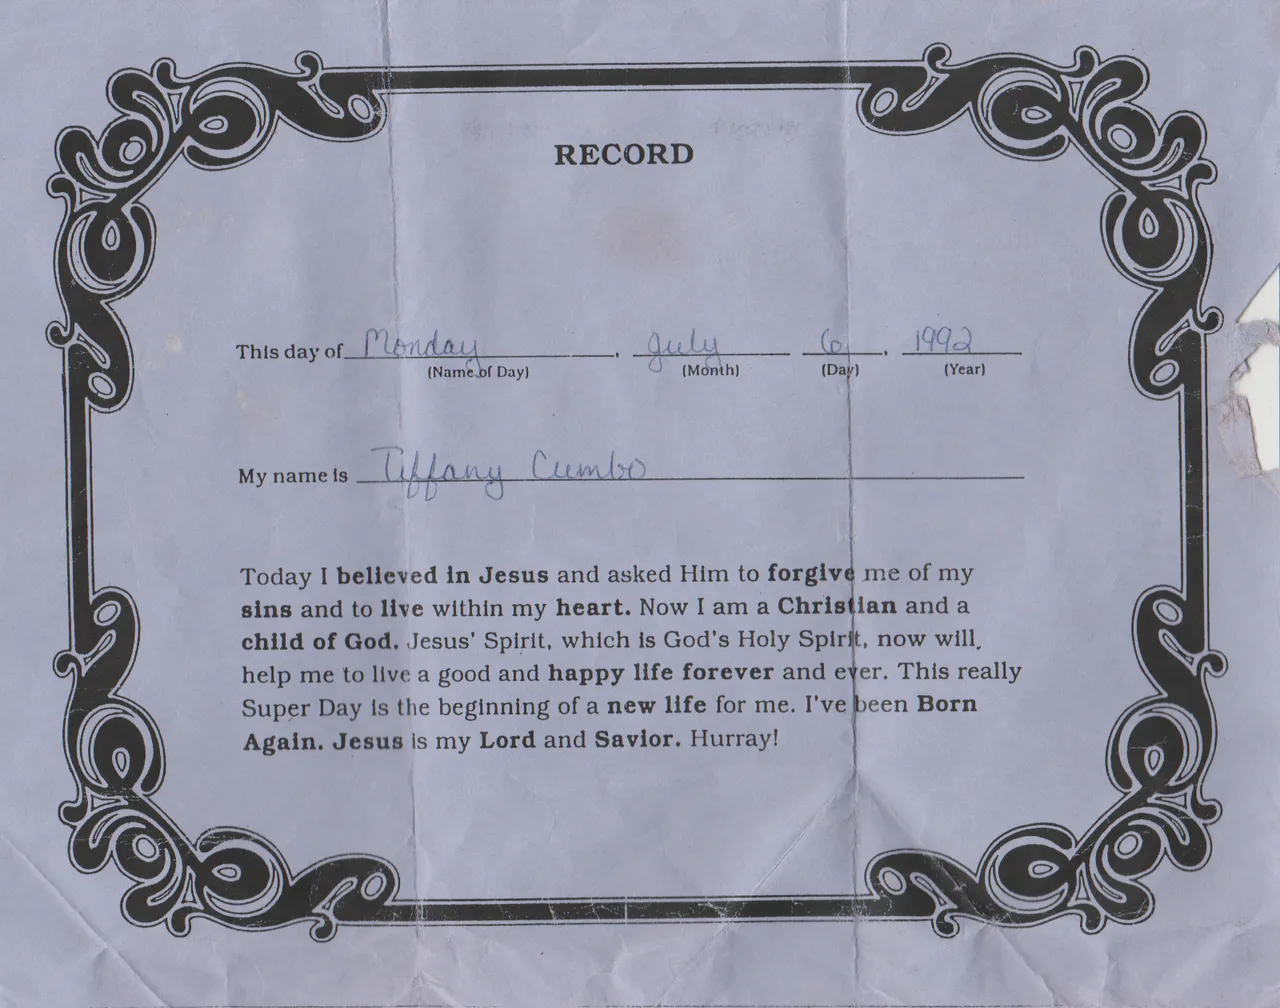 1992-07-06 Monday VBS Tiffany Cumbo Record Salvation Acceptance Certificate-1.png